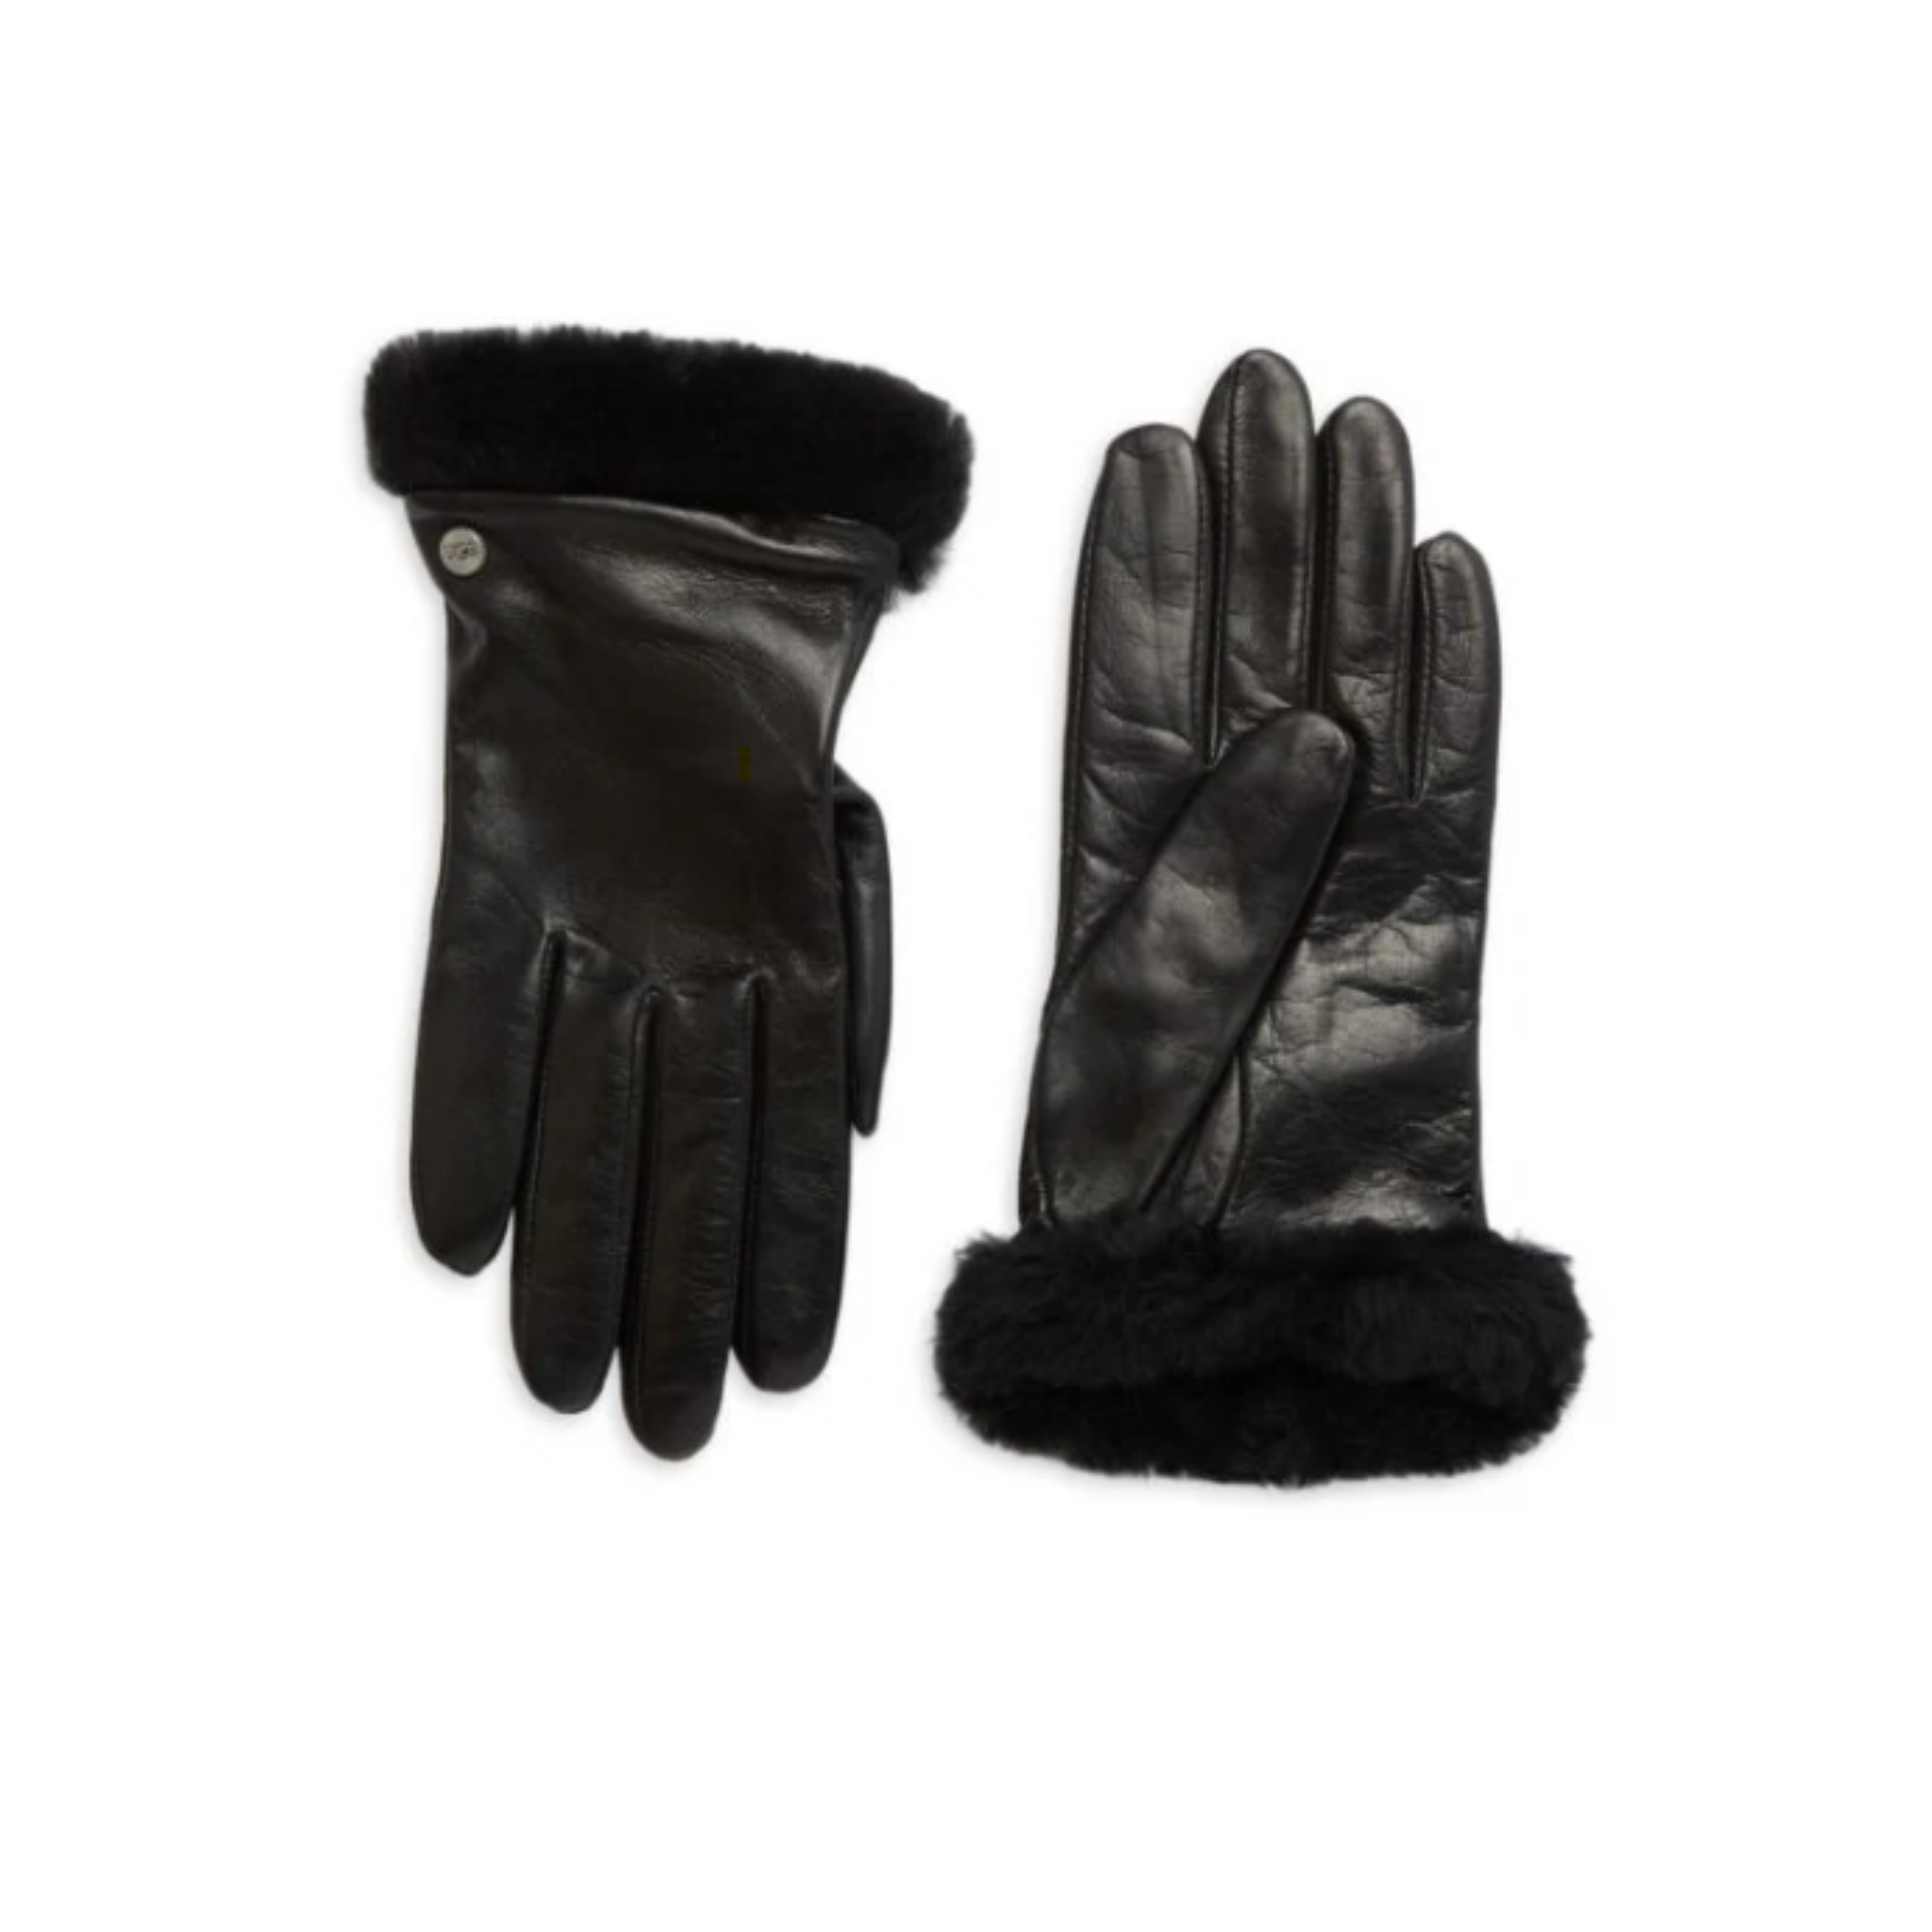 UGG Boots, Gloves, Earmuffs, Beanies, Scarfs. And More On Sale